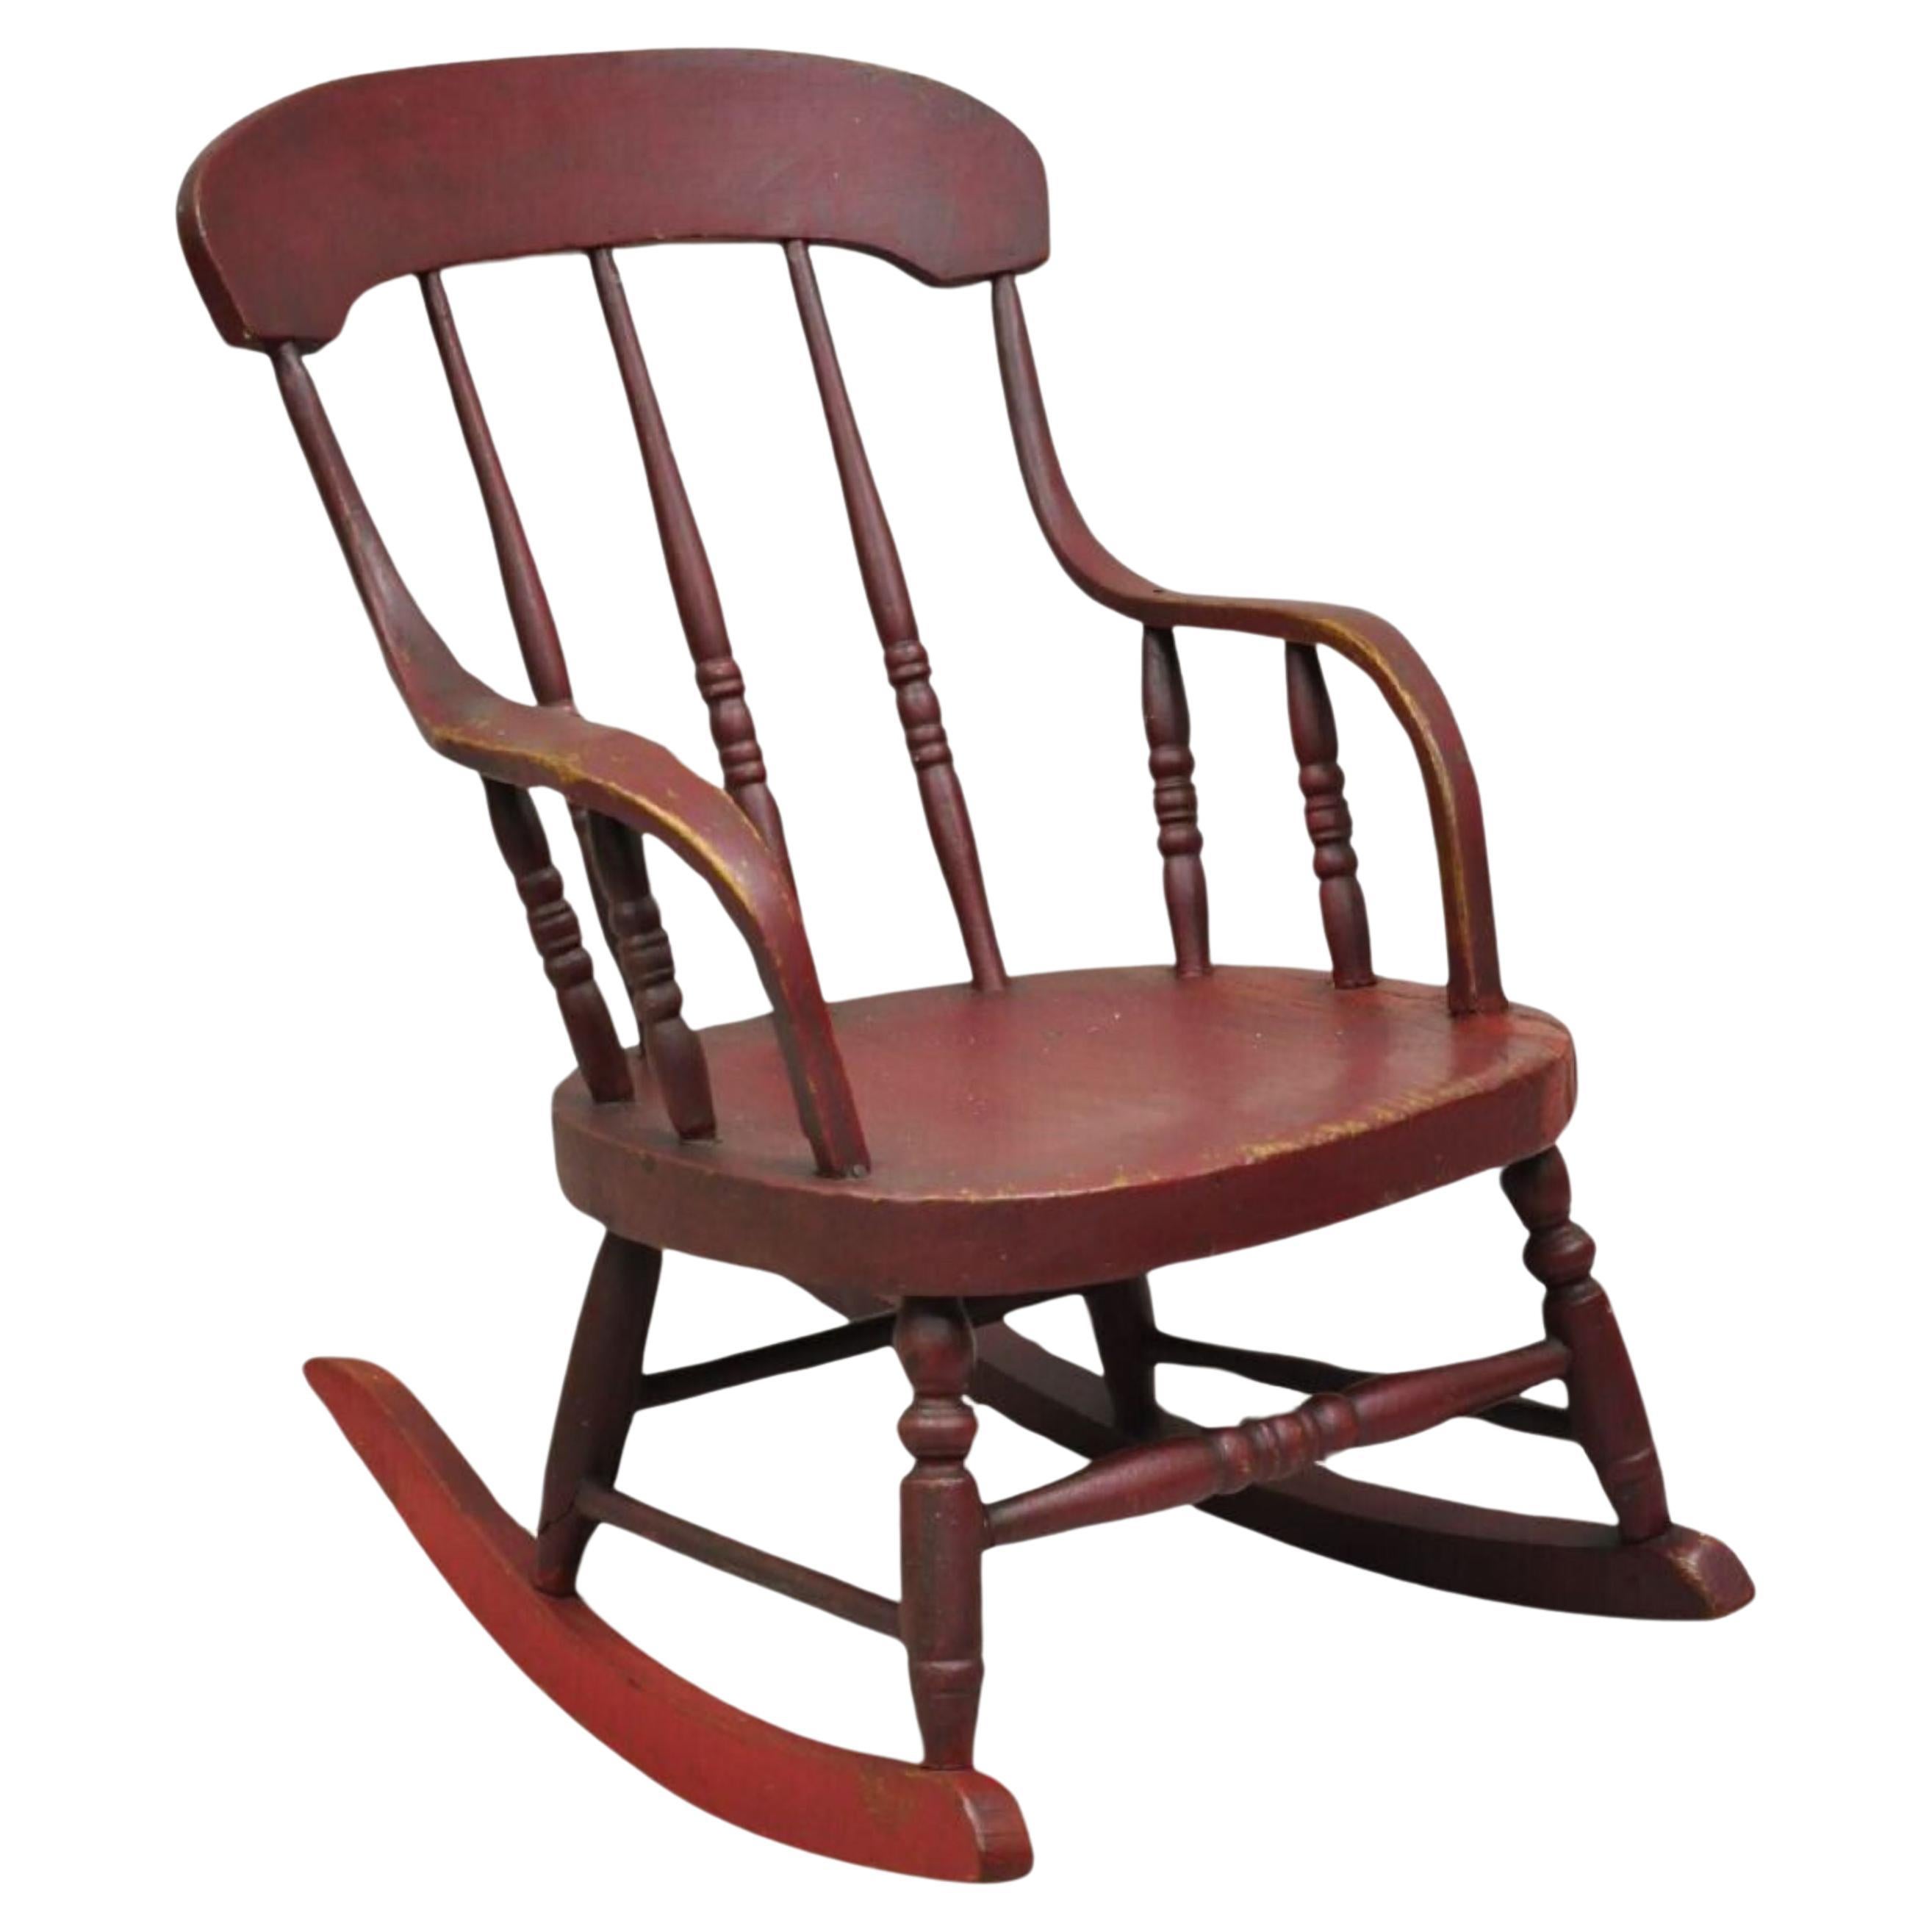 Antique American Primitive Spindle Back Small Child's Rocker Rocking Chair For Sale